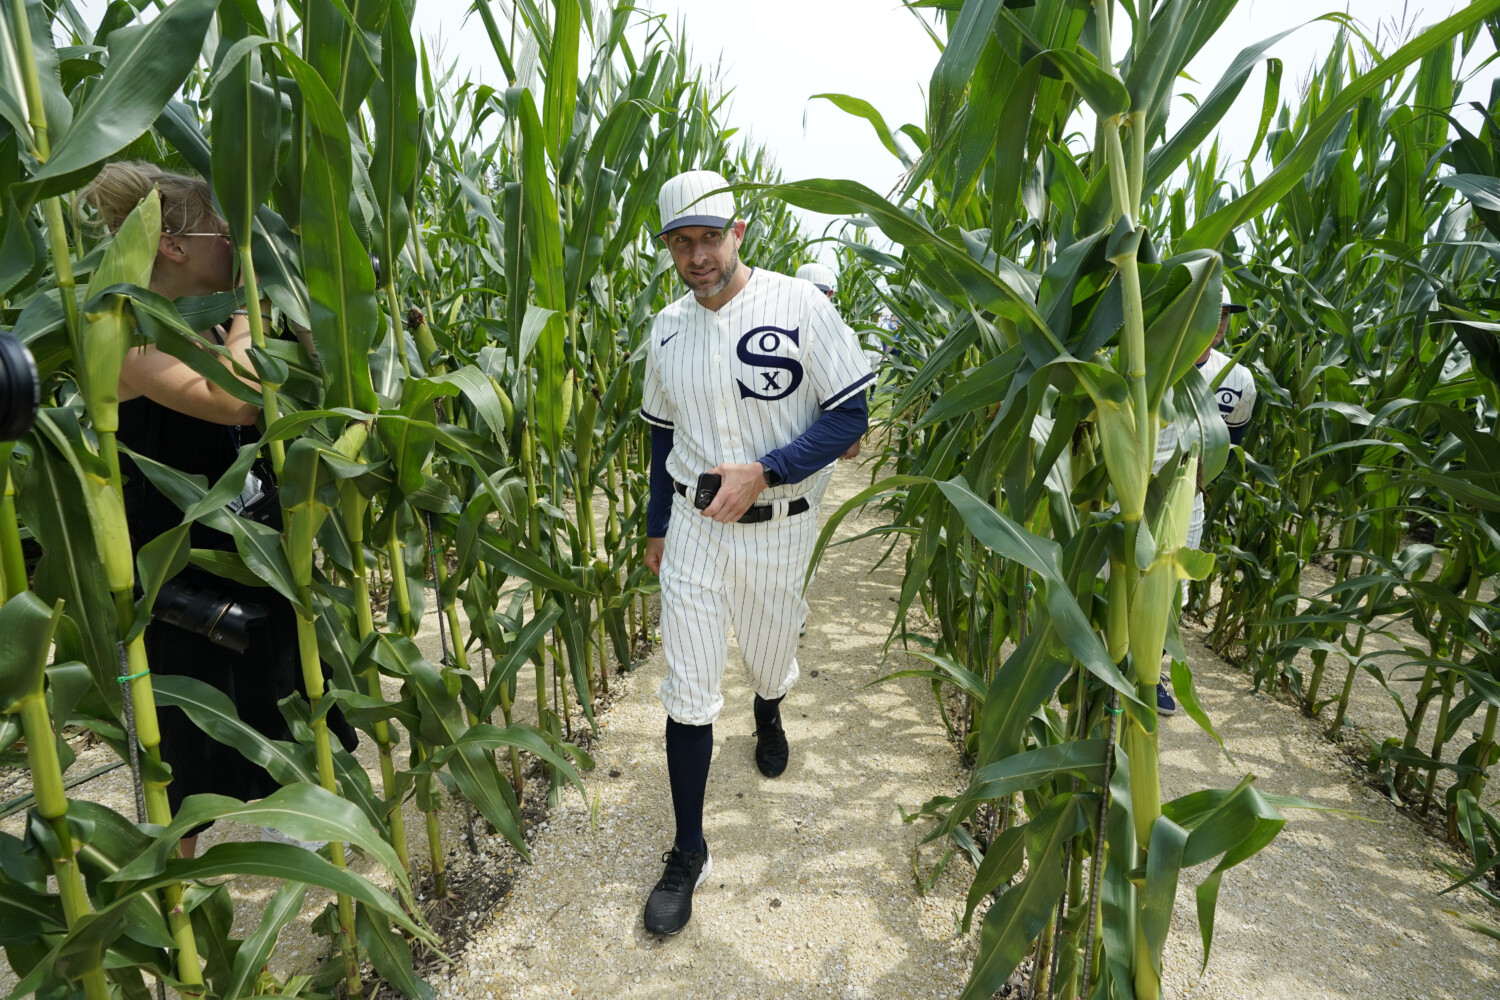 White Sox, Yankees in awe at Field of Dreams; MLB promises repeat